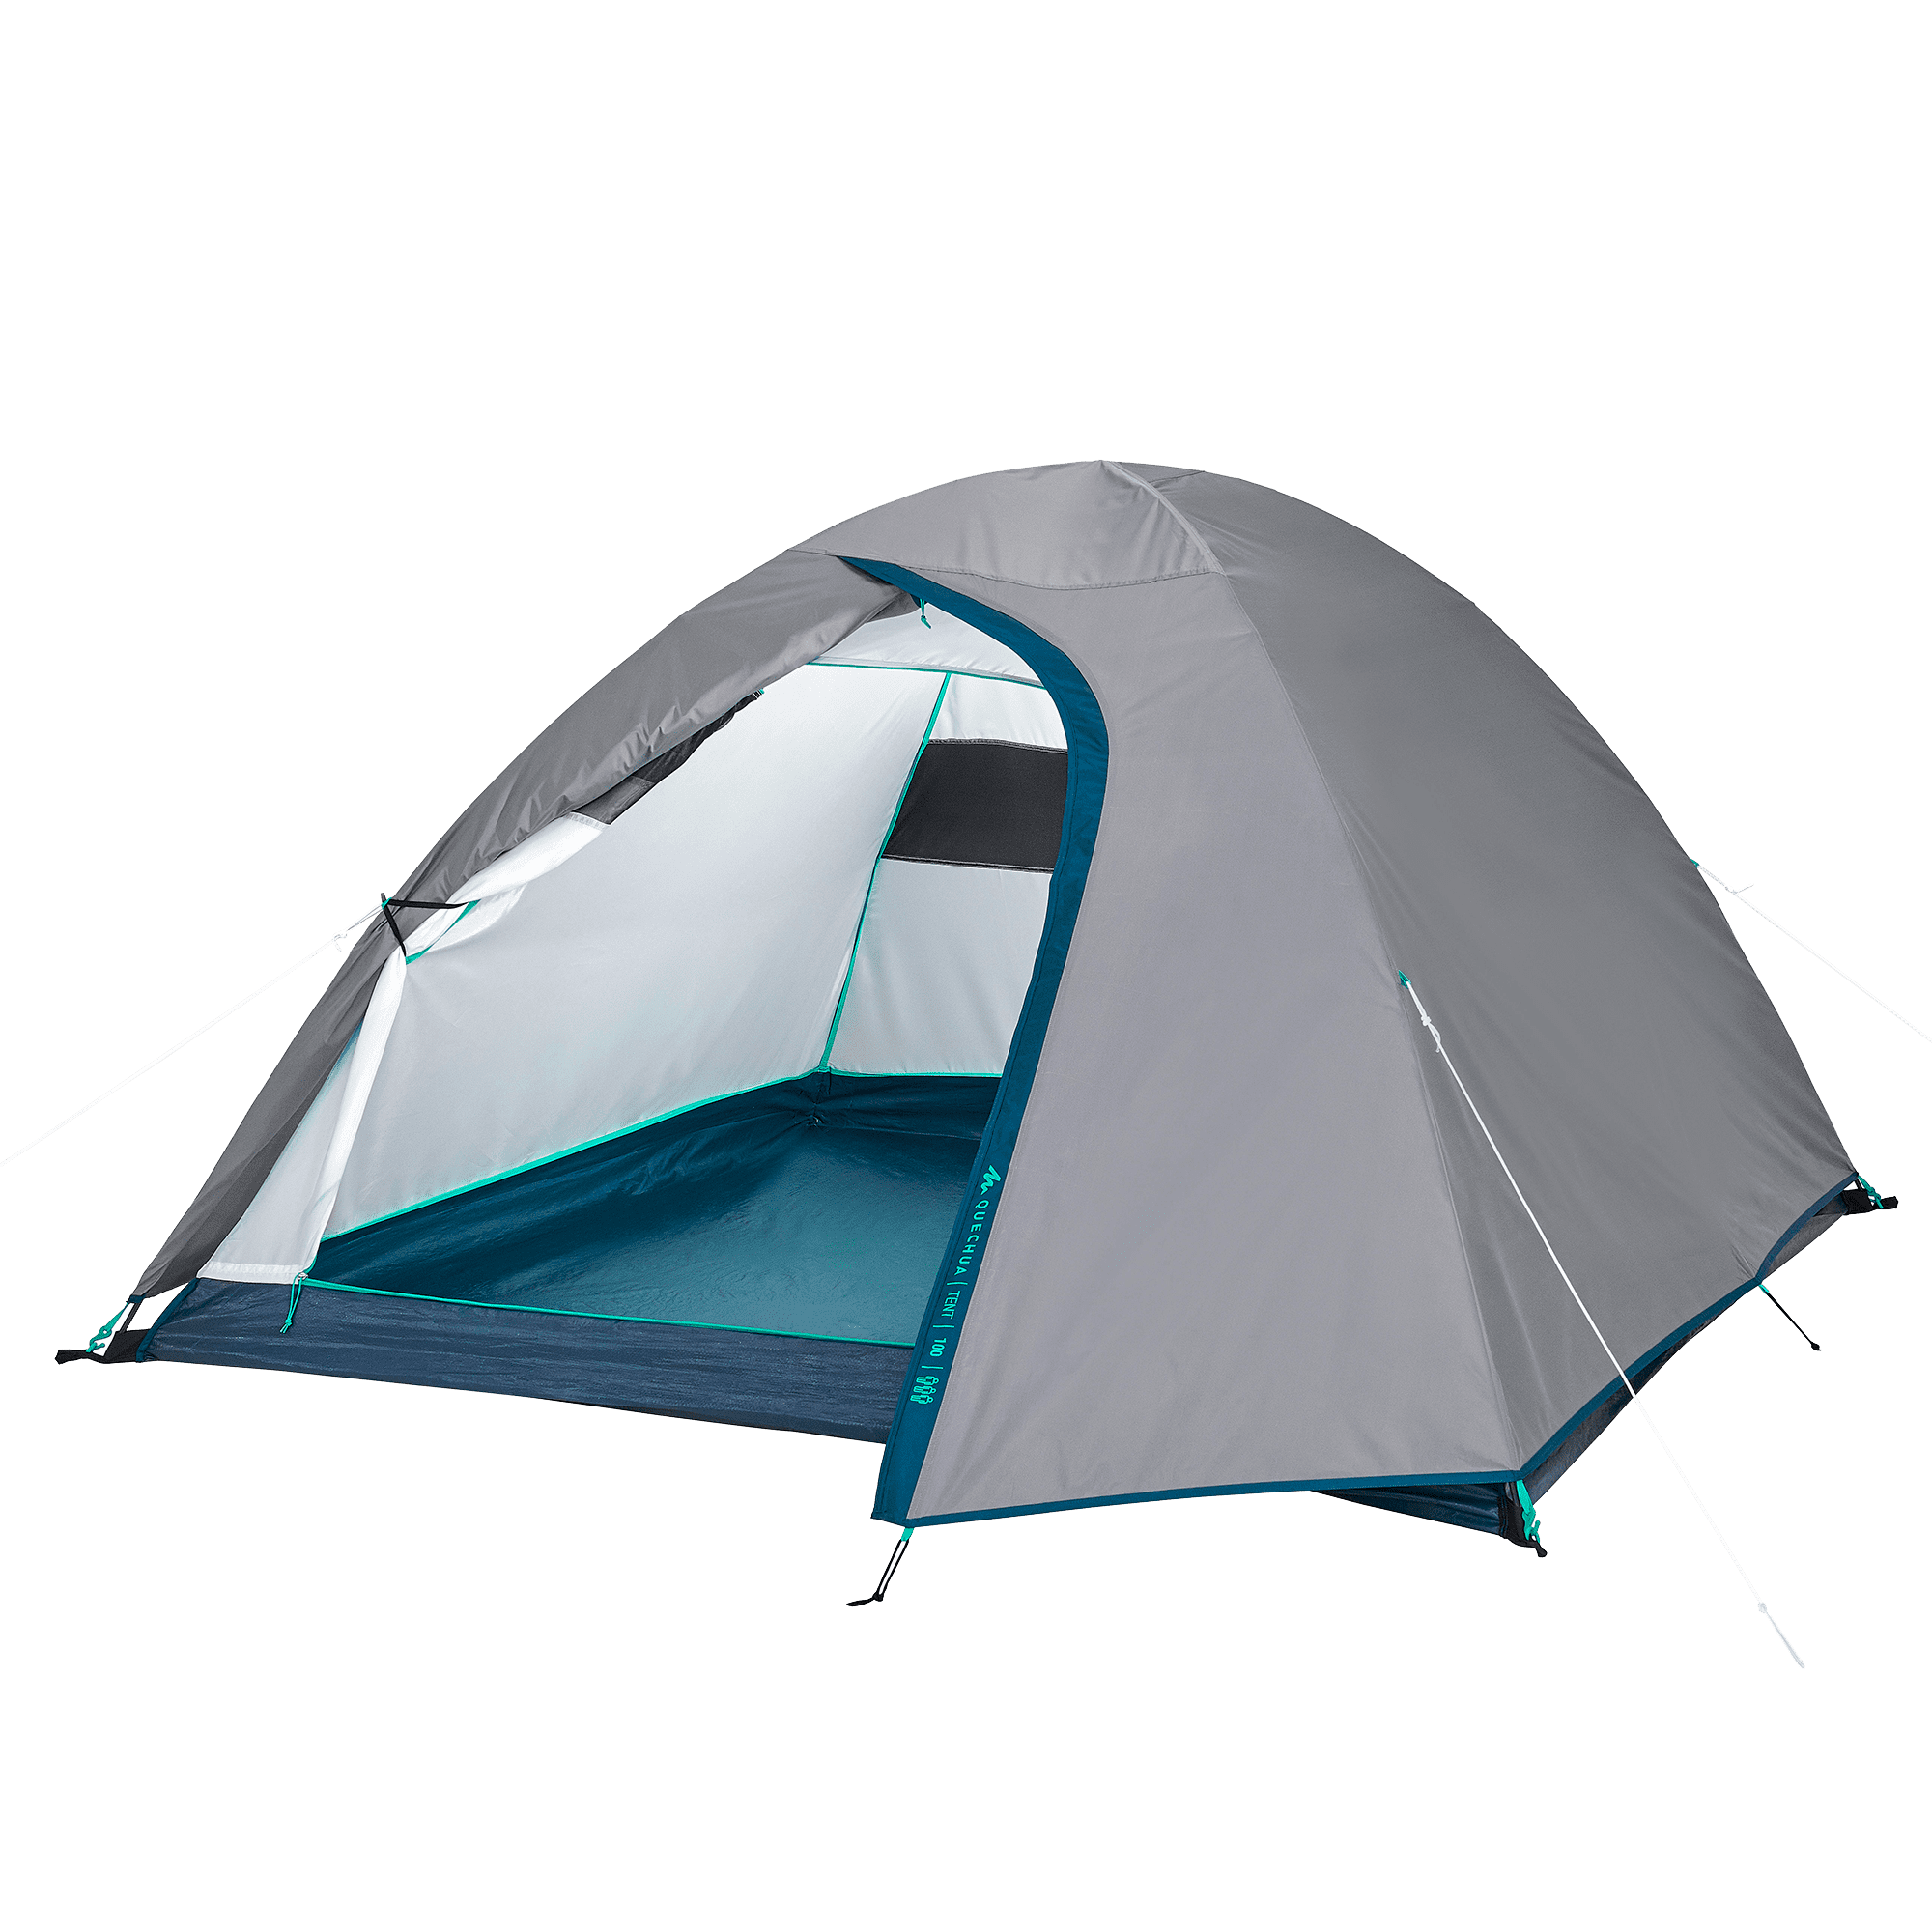 Decathlon Quechua MH100, 3 Person Dome Camping Tent, Waterproof,